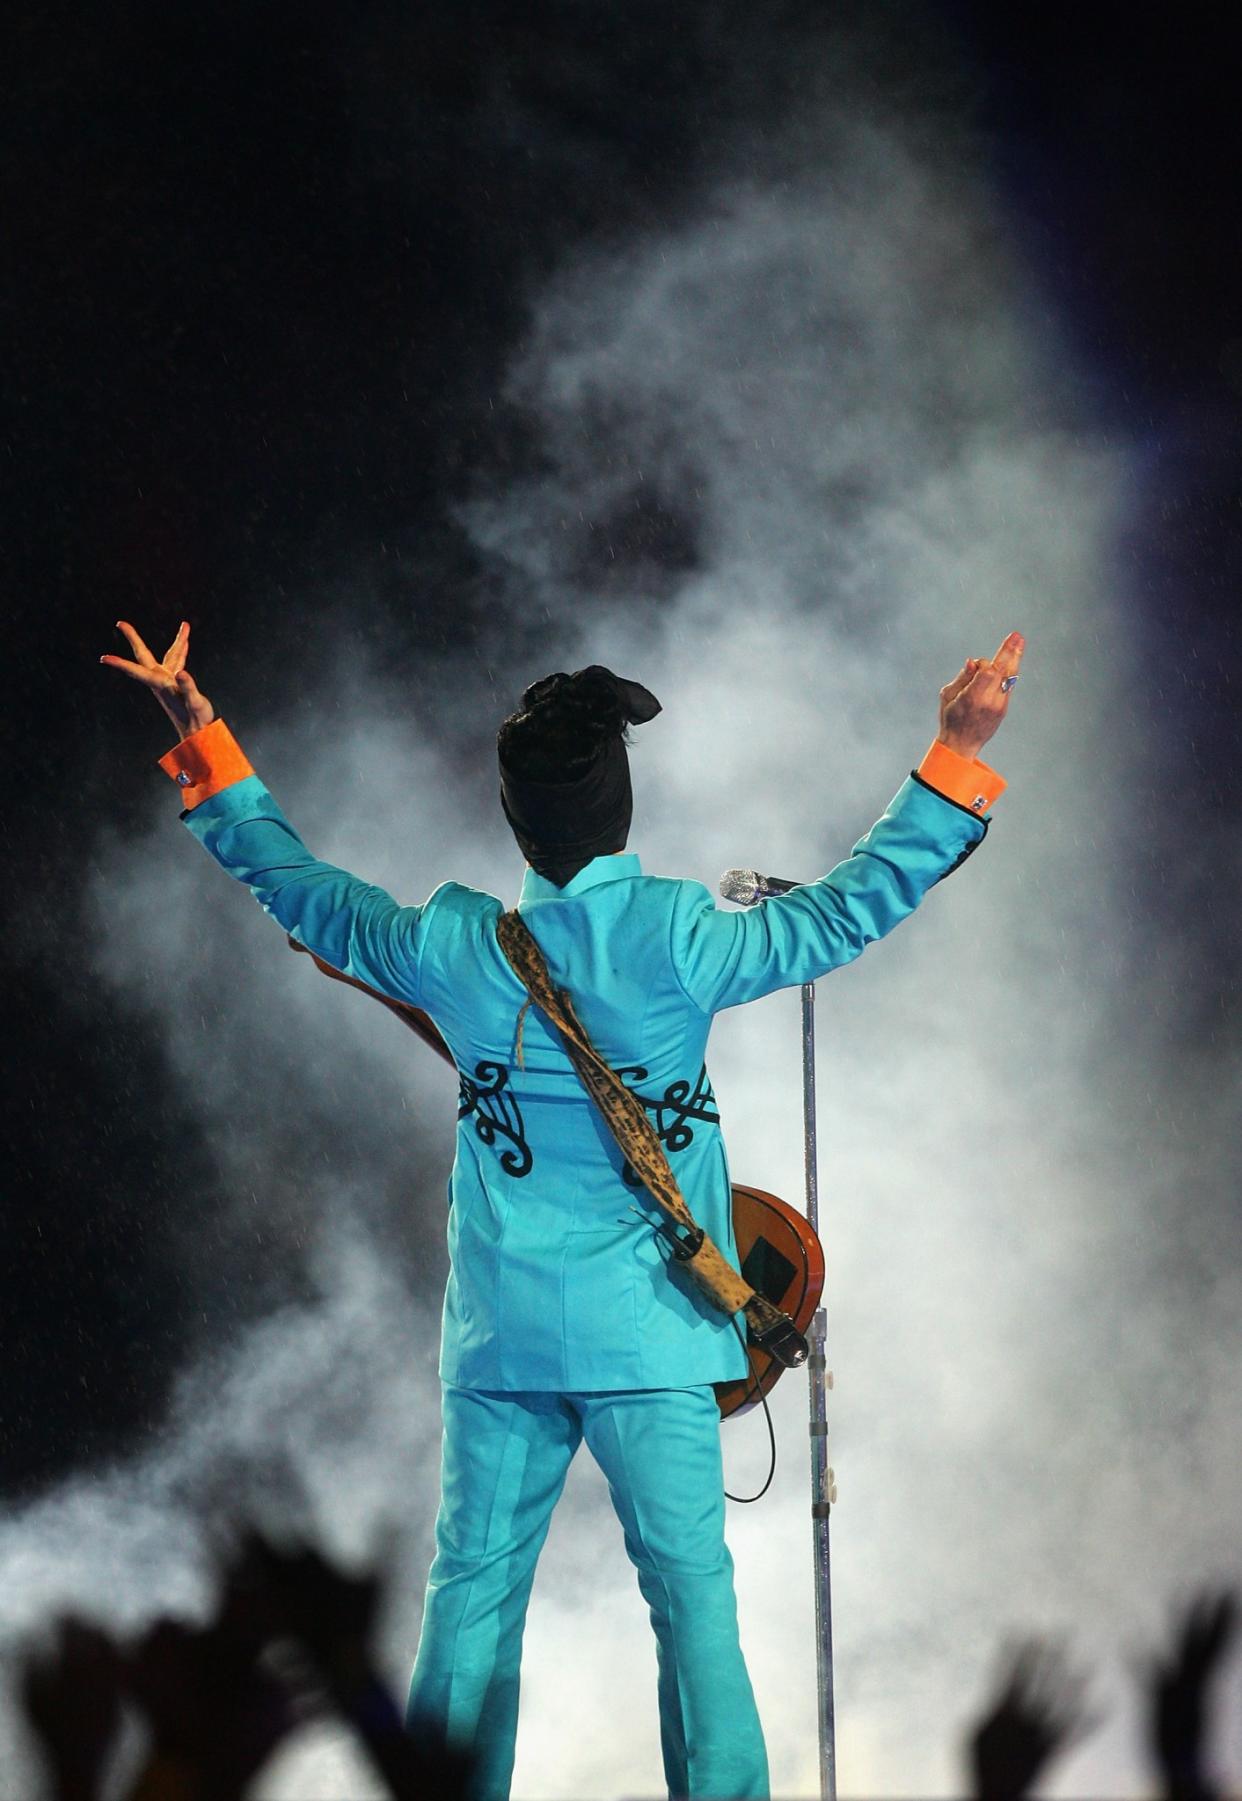 Prince performs during the Pepsi Halftime Show at Super Bowl XLI between the Indianapolis Colts and the Chicago Bears on February 4, 2007, at Dolphin Stadium in Miami. (Photo by Jed Jacobsohn/Getty Images)